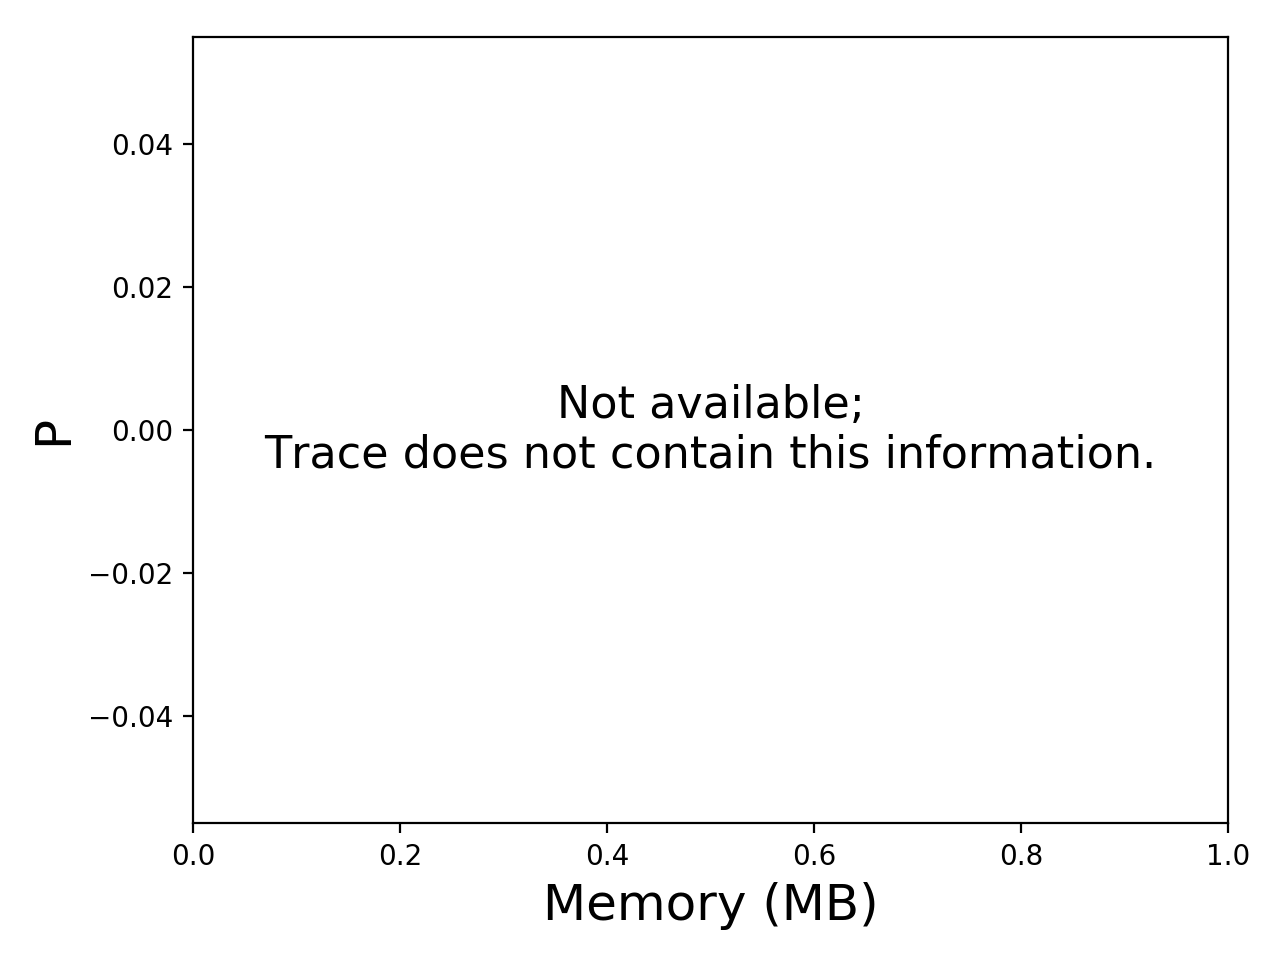 Task memory consumption graph for the shell trace.